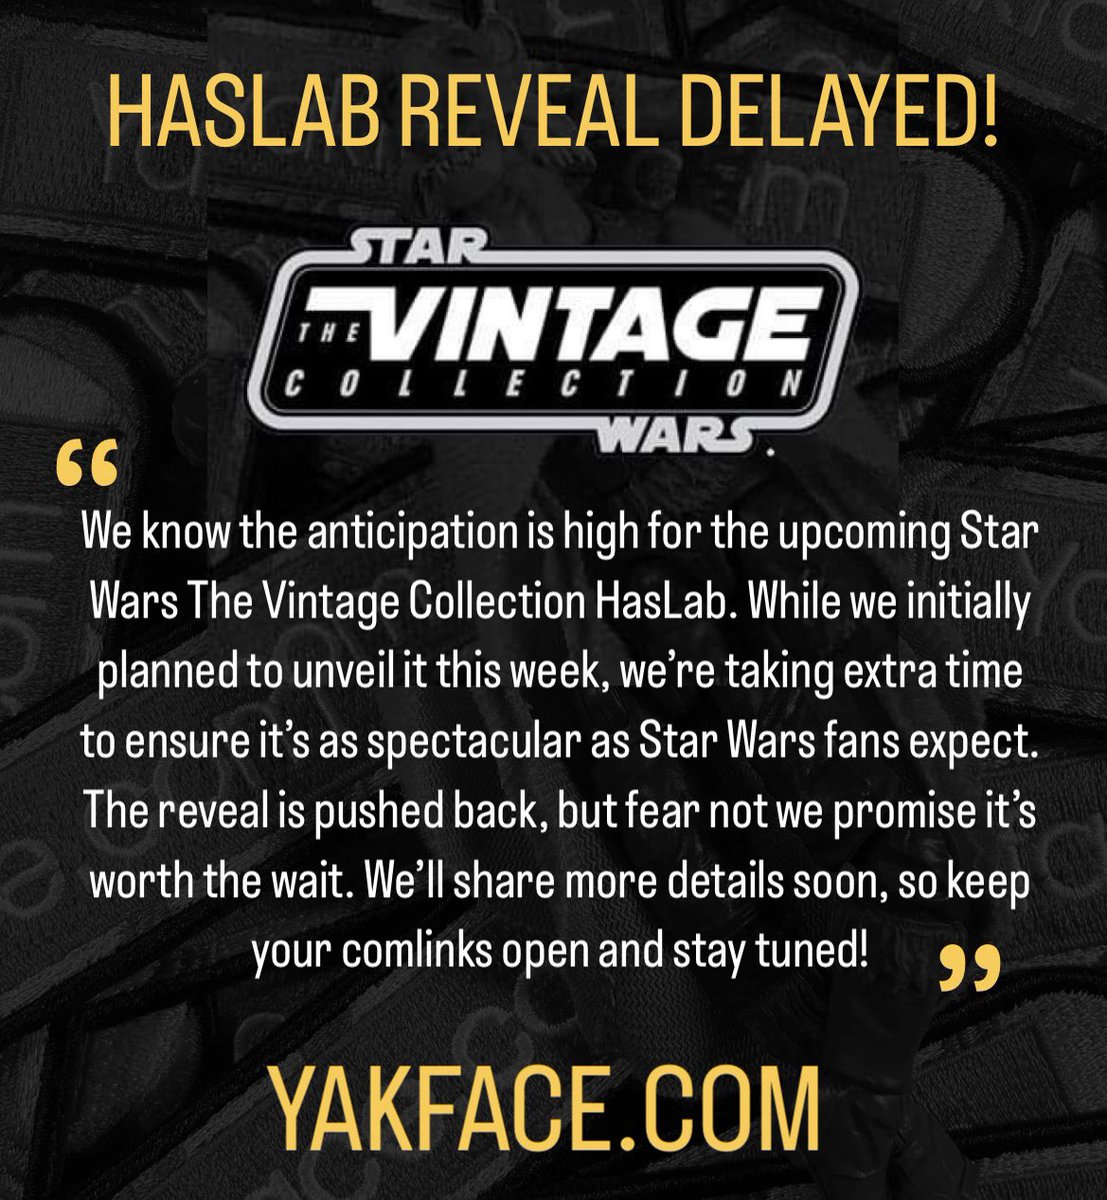 From Hasbro: “We know the anticipation is high for the upcoming Star Wars The Vintage Collection HasLab. While we initially planned to unveil it this week, we’re taking extra time to ensure it’s as spectacular as Star Wars fans expect. The reveal is pushed back, but fear not we…